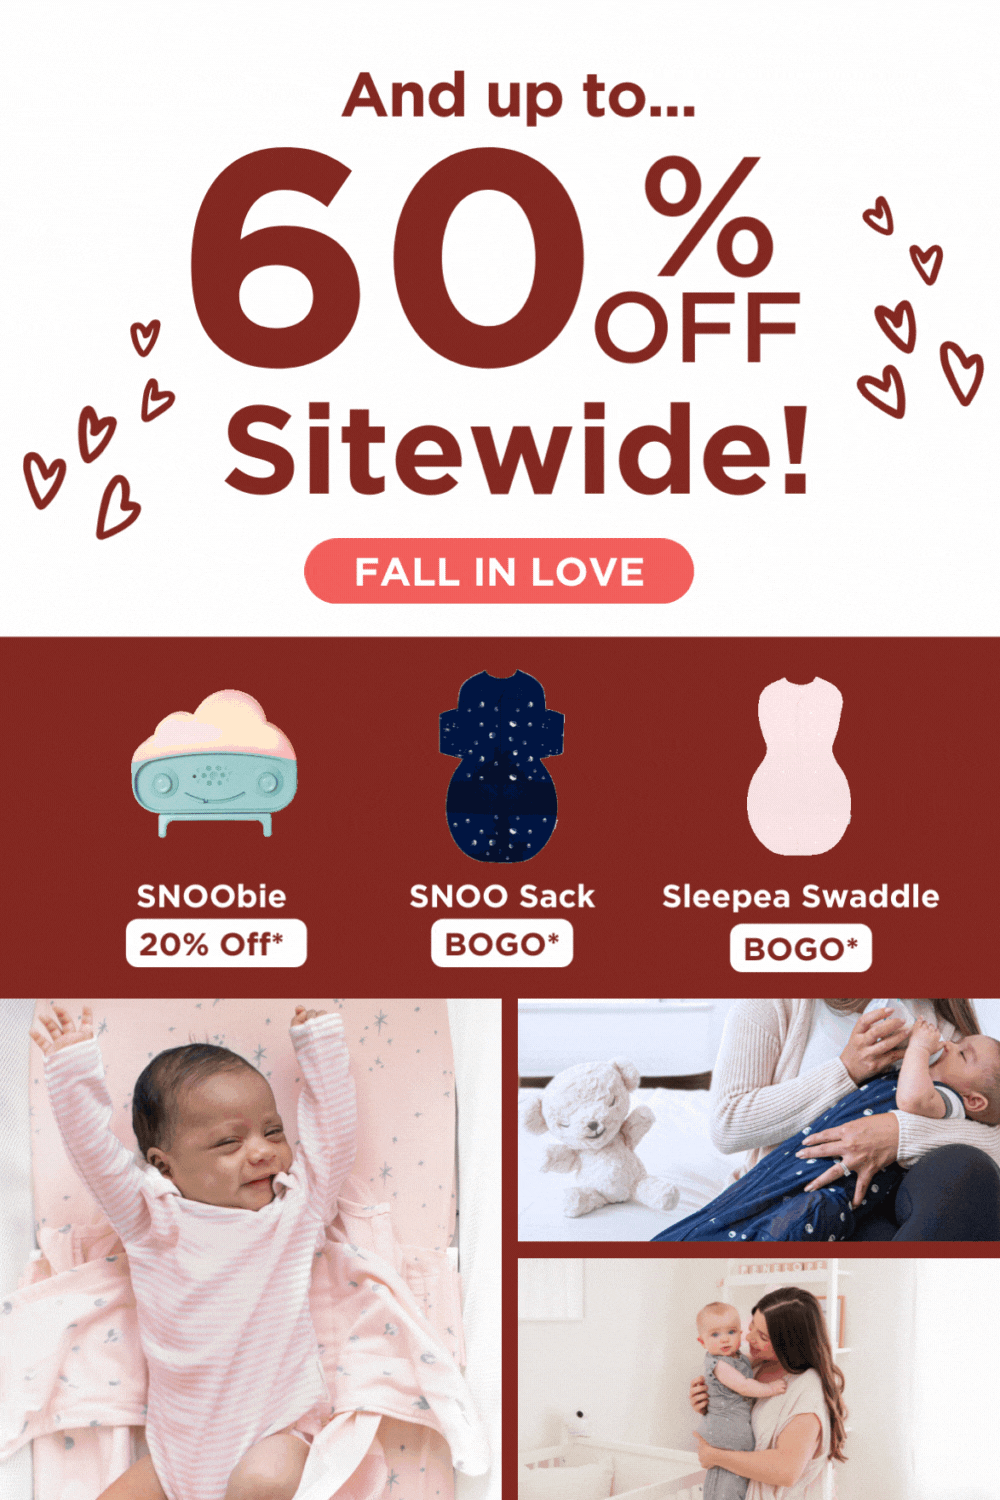 And up to...60% OFF Sitewide! FALL IN LOVE! SNOObie 20% Off*, SNOO Sack BOGO*, Sleepea Swaddle BOGO*.